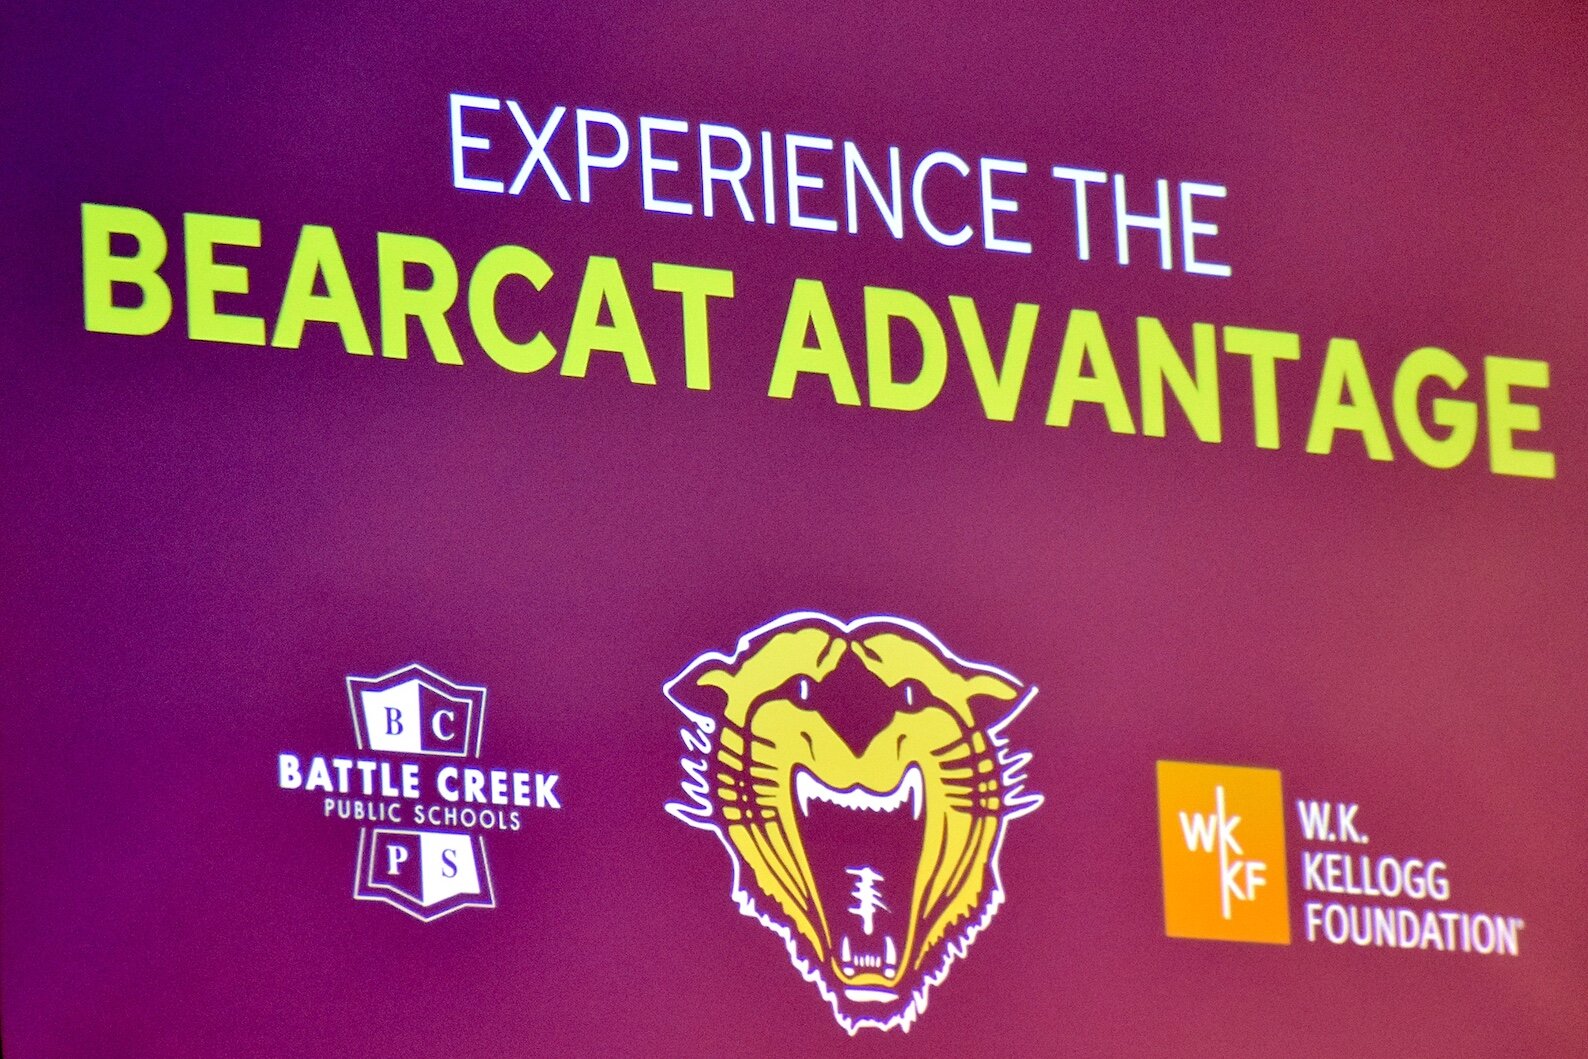 Battle Creek Central High School’s college decision day and the announcement of the Bearcat Advantage were held at W.K. Kellogg Auditorium.